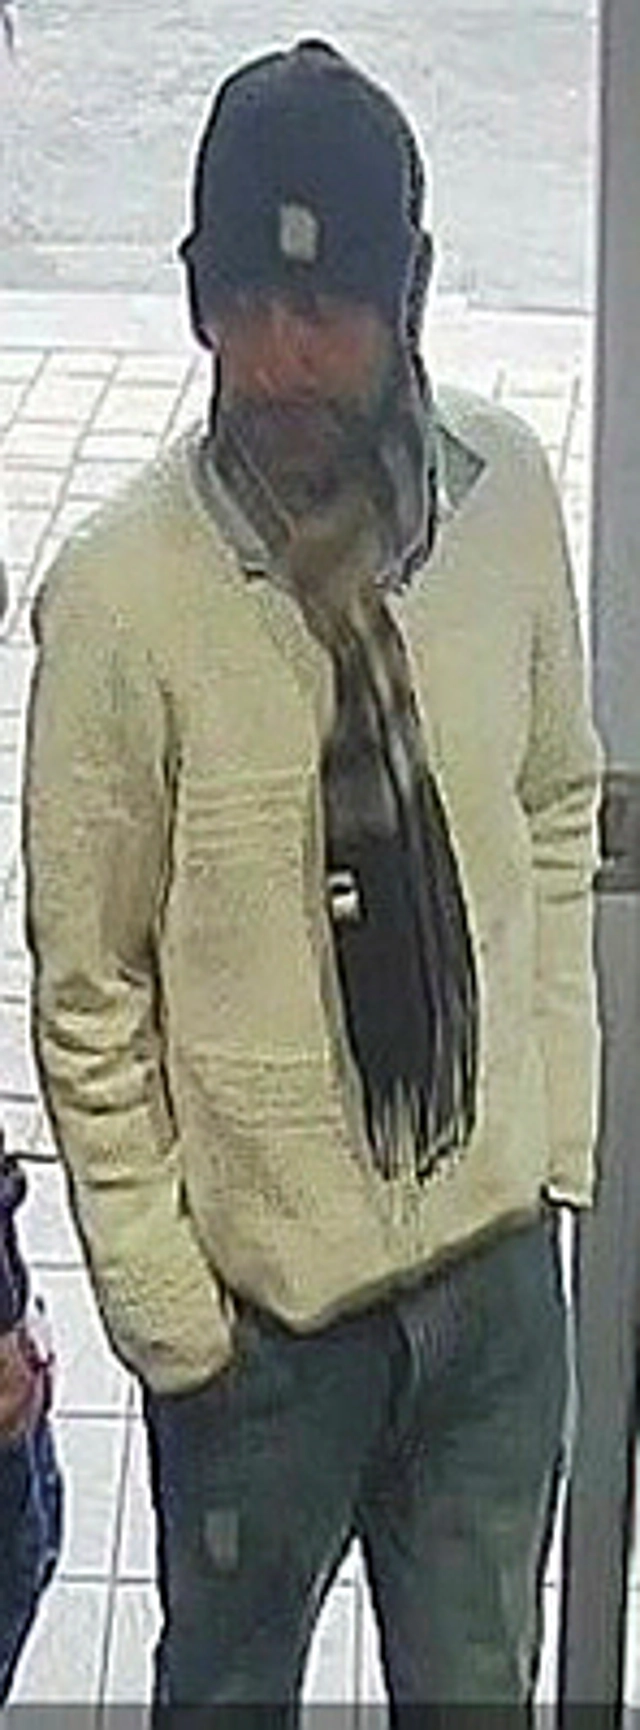 Cops Step Up Hunt For Criminal Who Snatched £6,000 Pounds From Woman Waiting In Wembley Bank